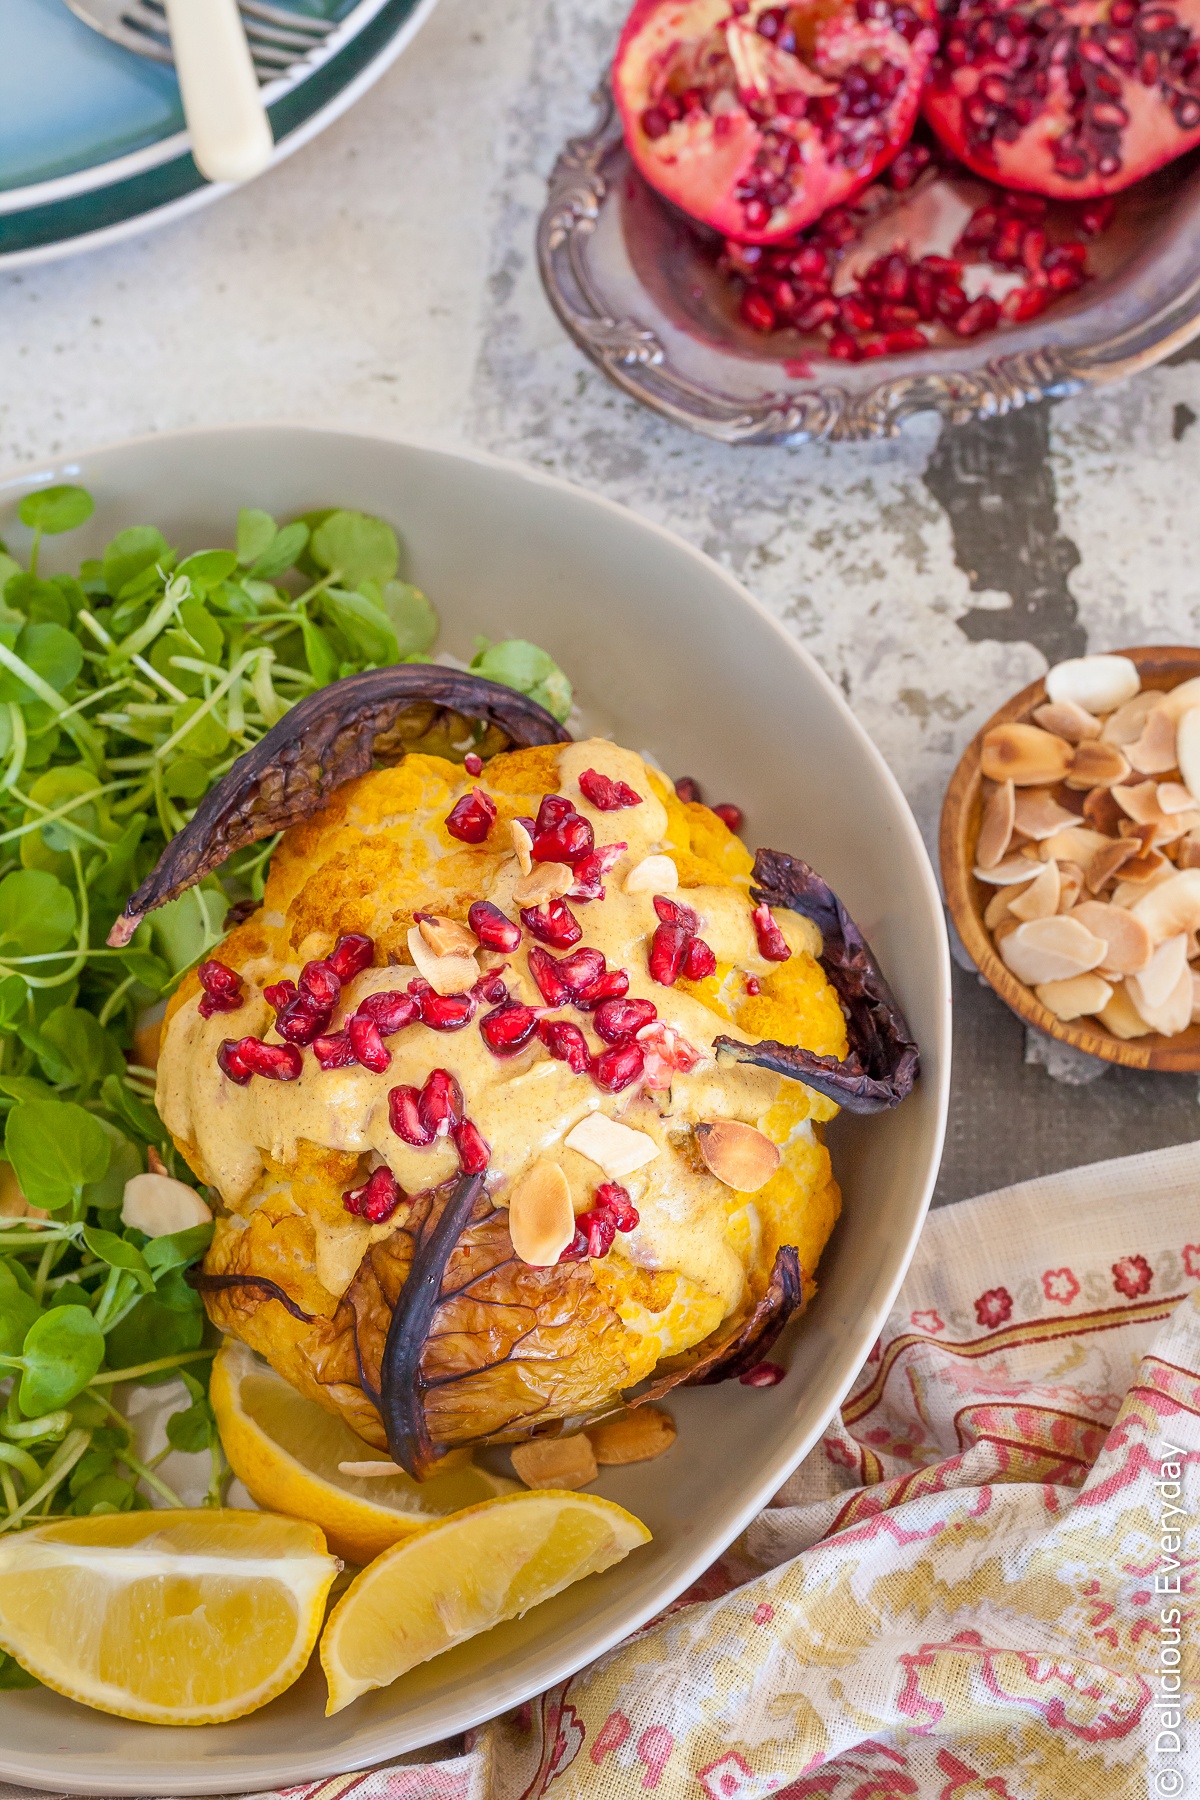 This Whole Roasted Cauliflower Head recipe is a wonderful way to enjoy cauliflower as baking it really amps up the flavour. Bathed in an nutty Tahini Sauce with gorgeously fragrant ras el hanout topped with pomegranate seeds and toasted almonds its a far cry from the cauliflower you pushed around your plate growing up!